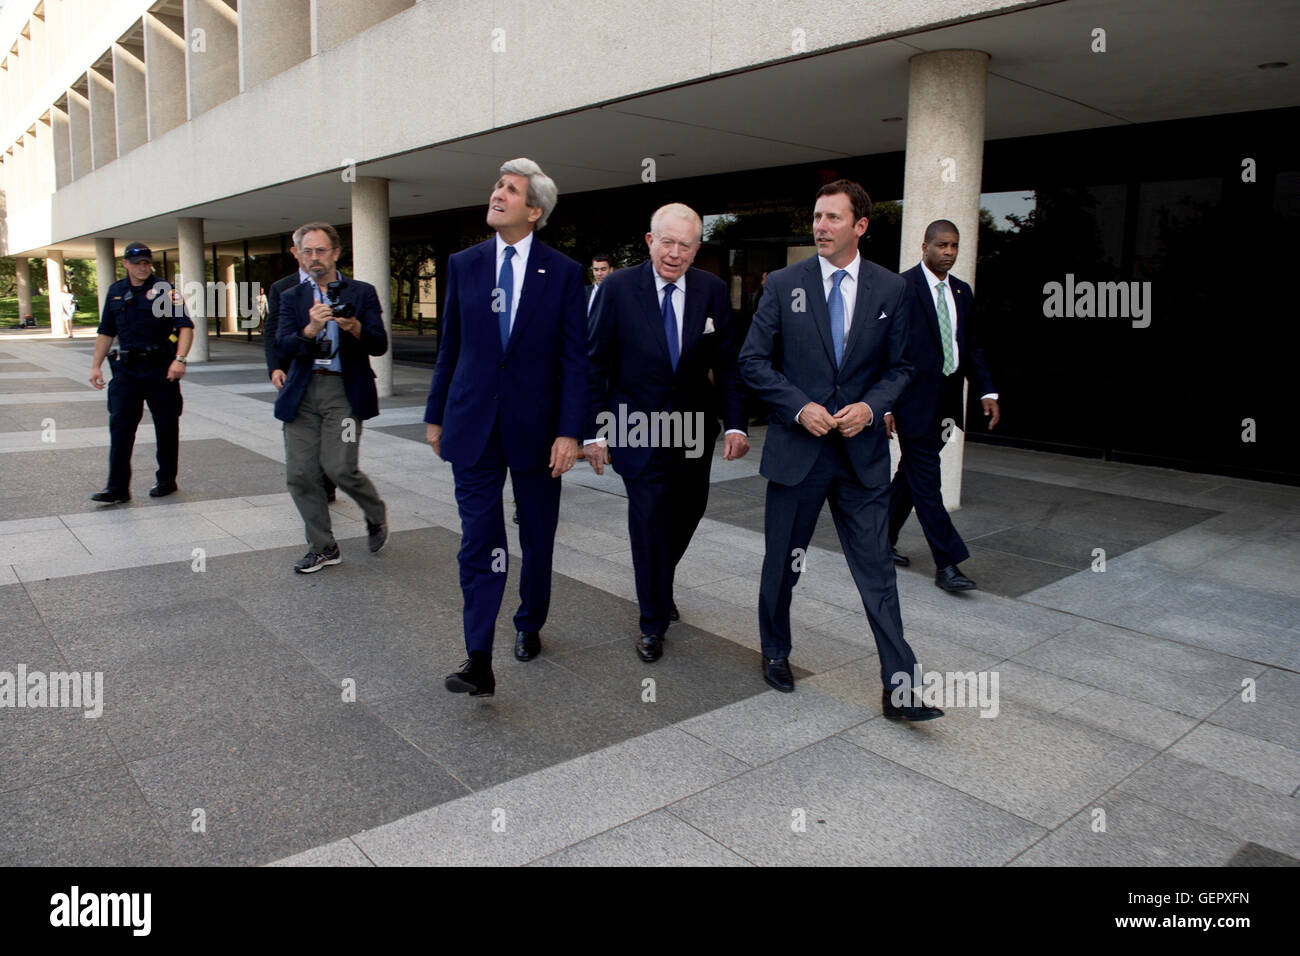 Secretary Kerry Walks With LBJ Presidential Library Vice Chairman Barnes and Library Director Updegrove Outside the LBJ School of Public Affairs at the University of Texas at Austin Stock Photo